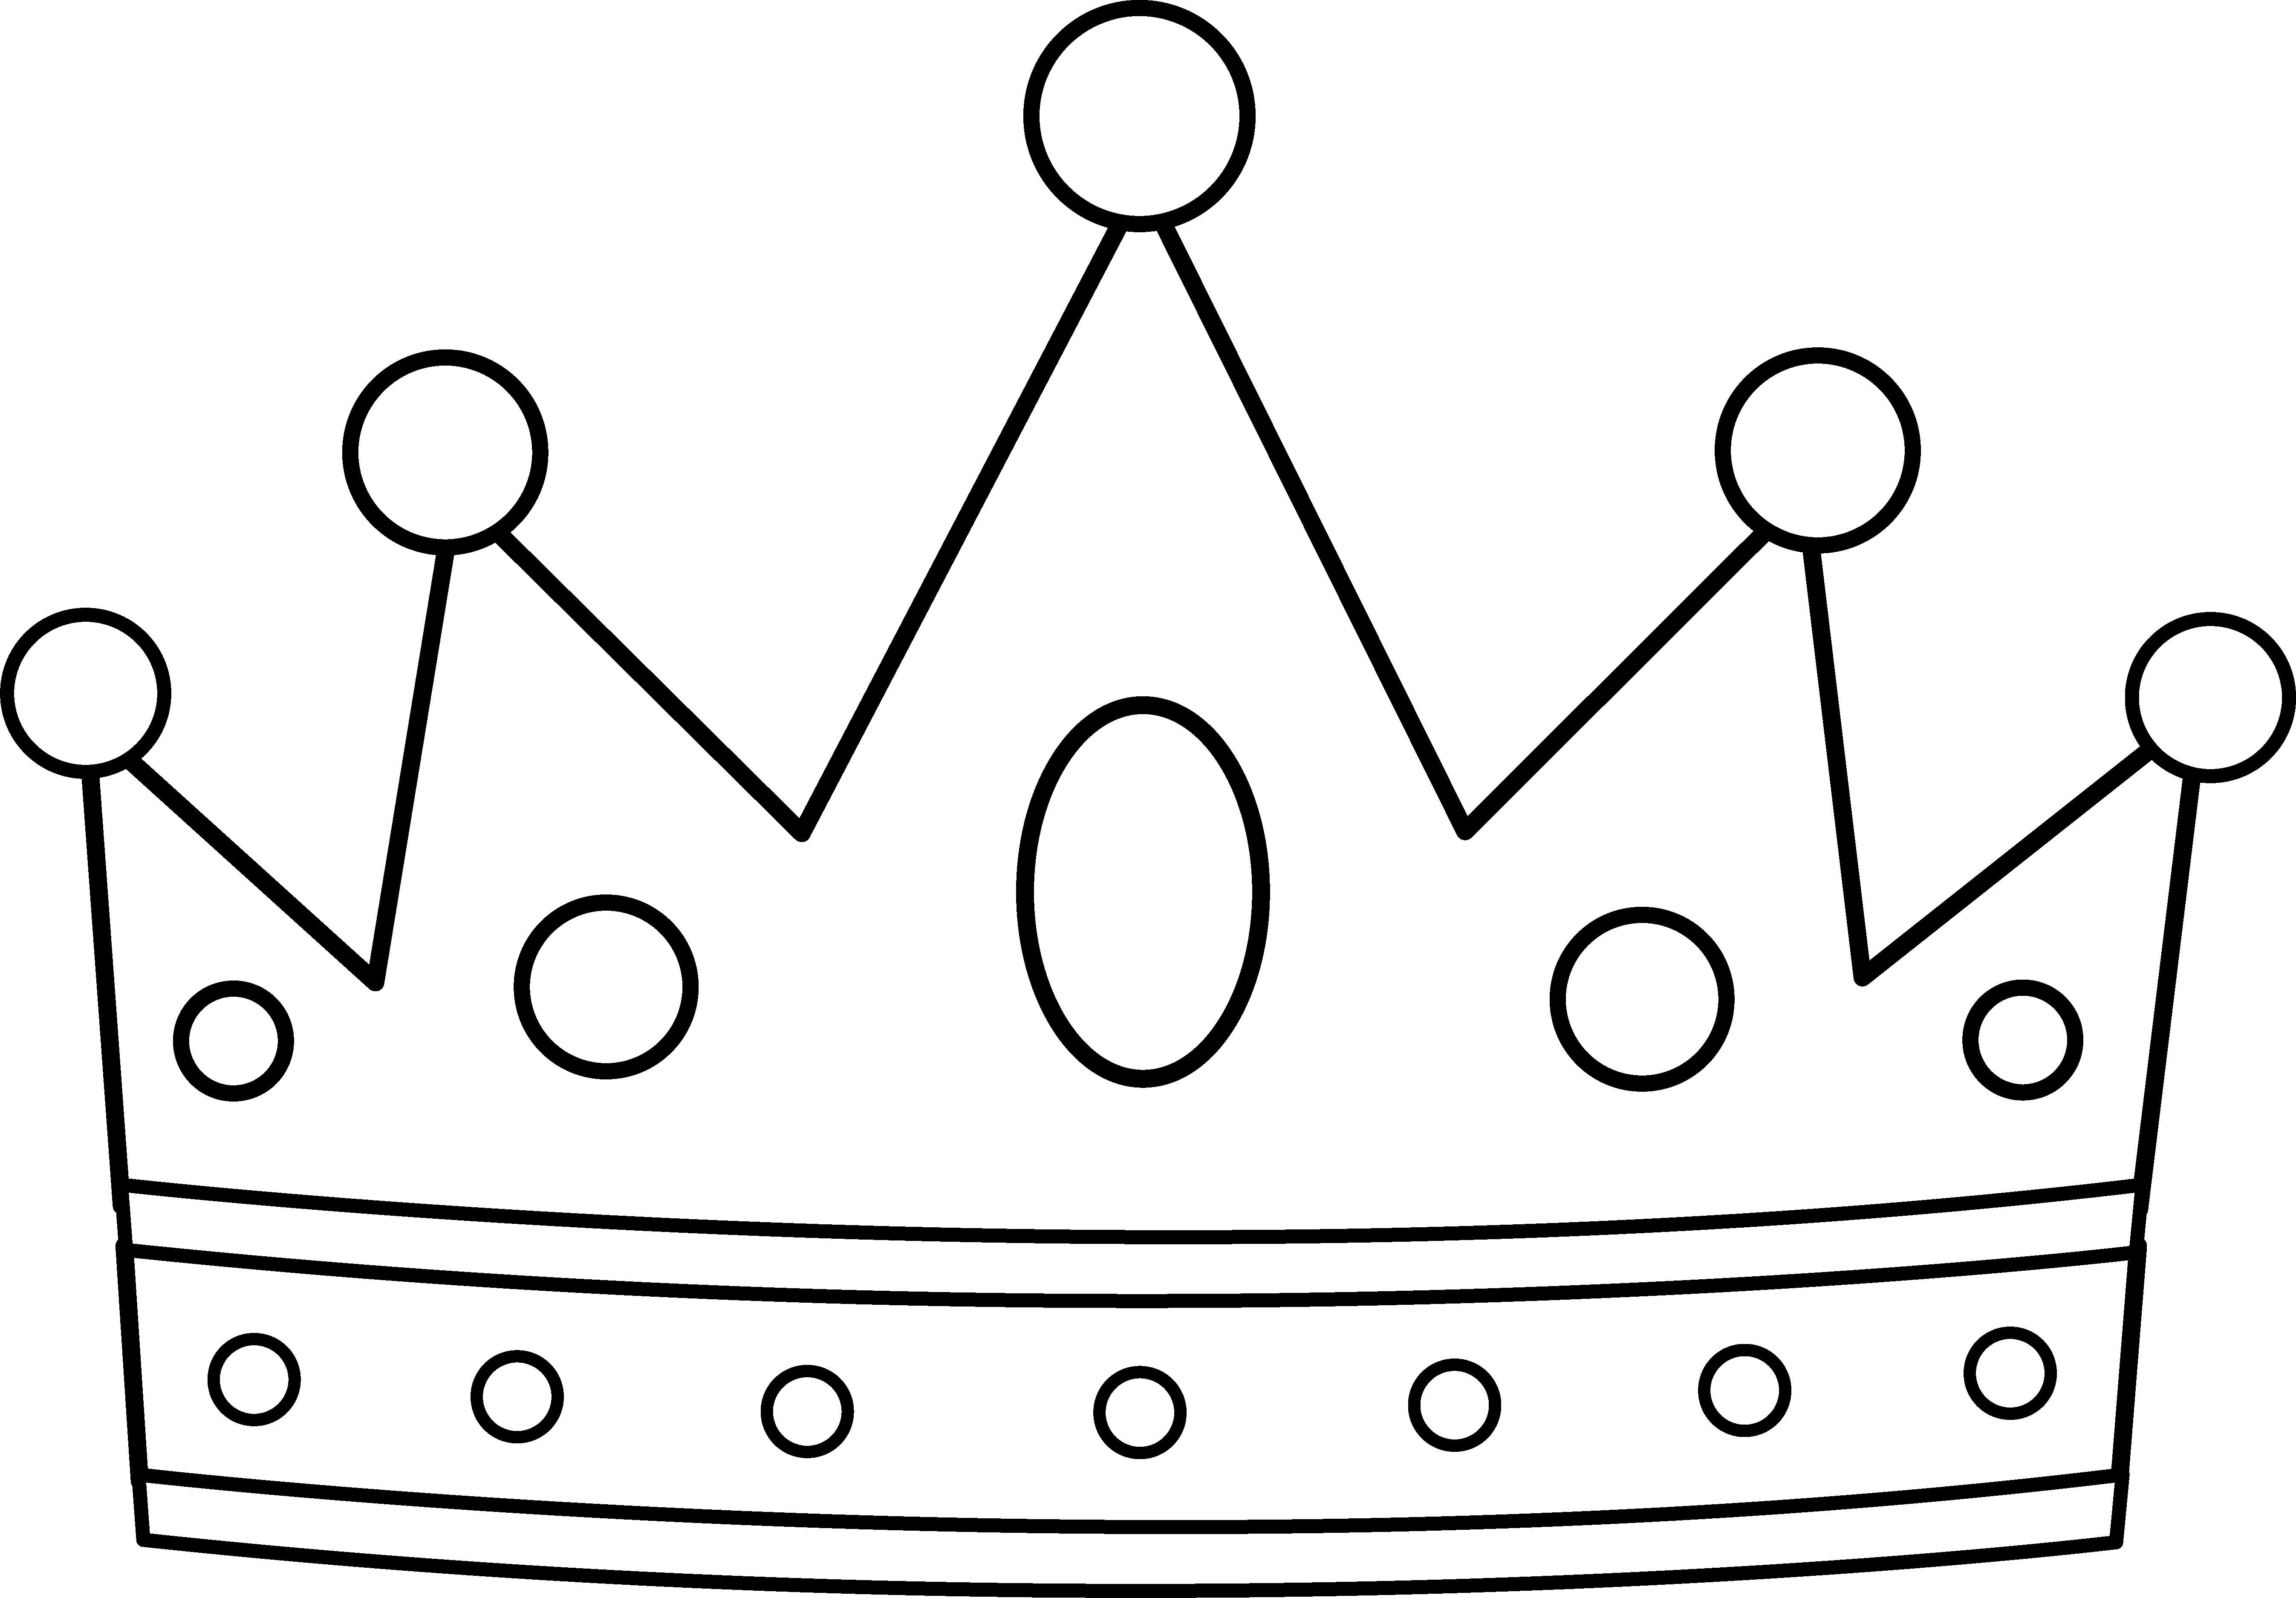 Big King And Queen Crown Templates Princess Template Impressive 3 